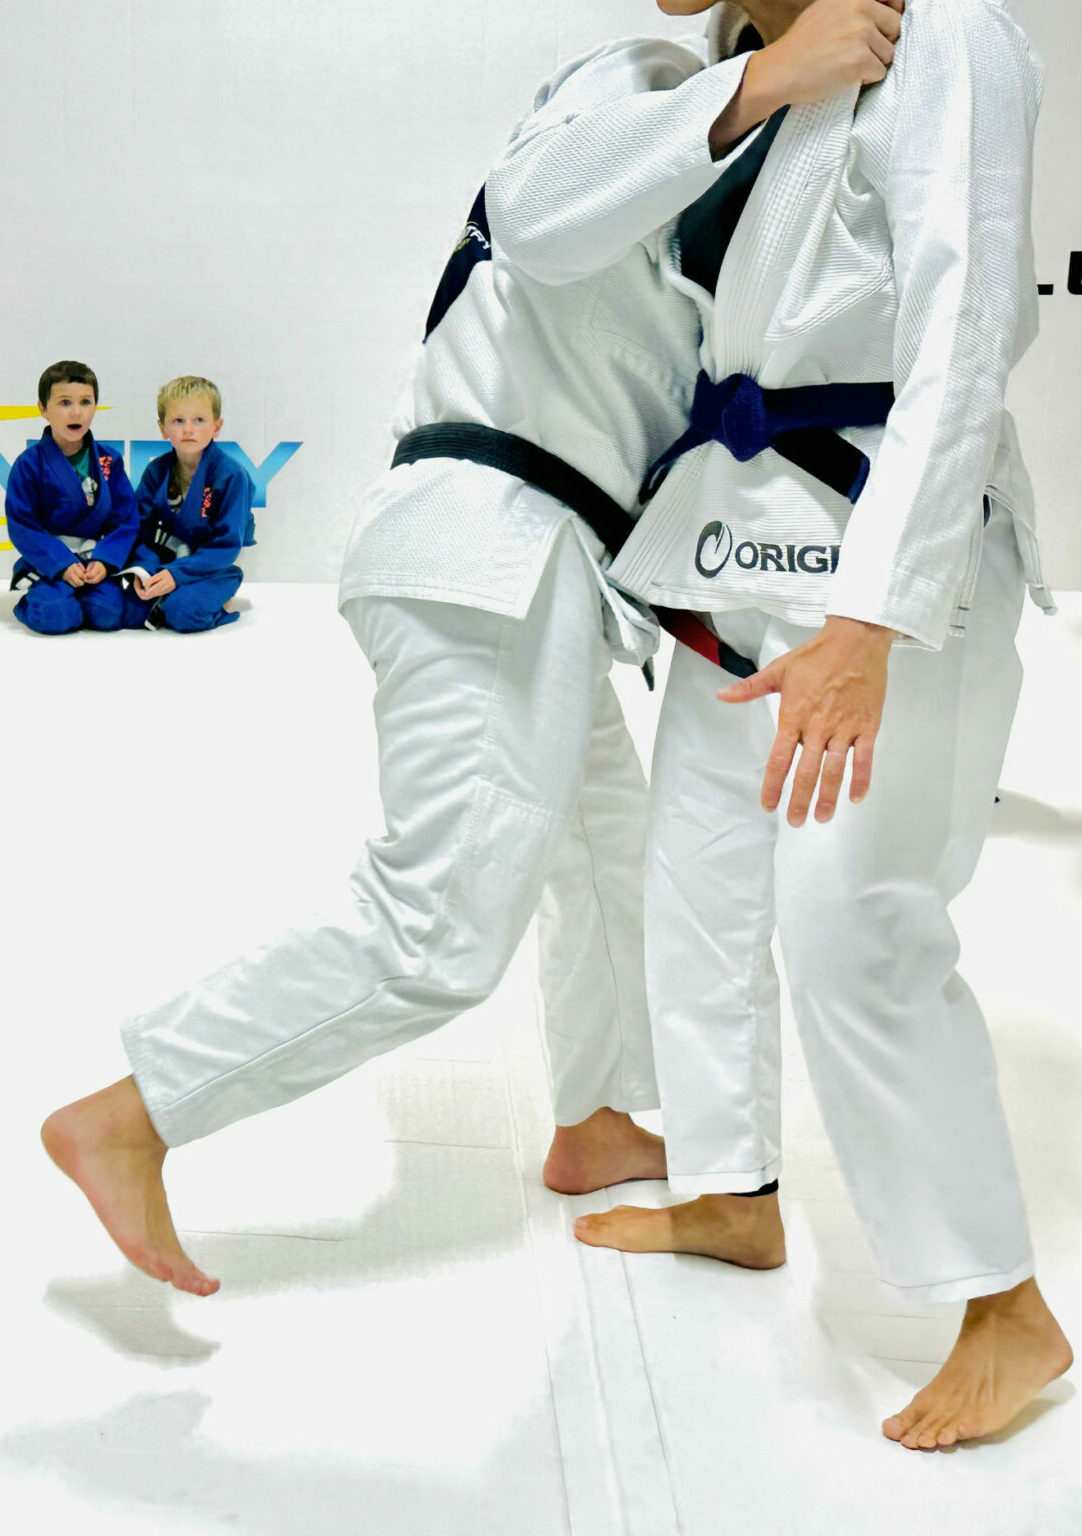 North Country Martial Arts Academy 4 Week Discount!